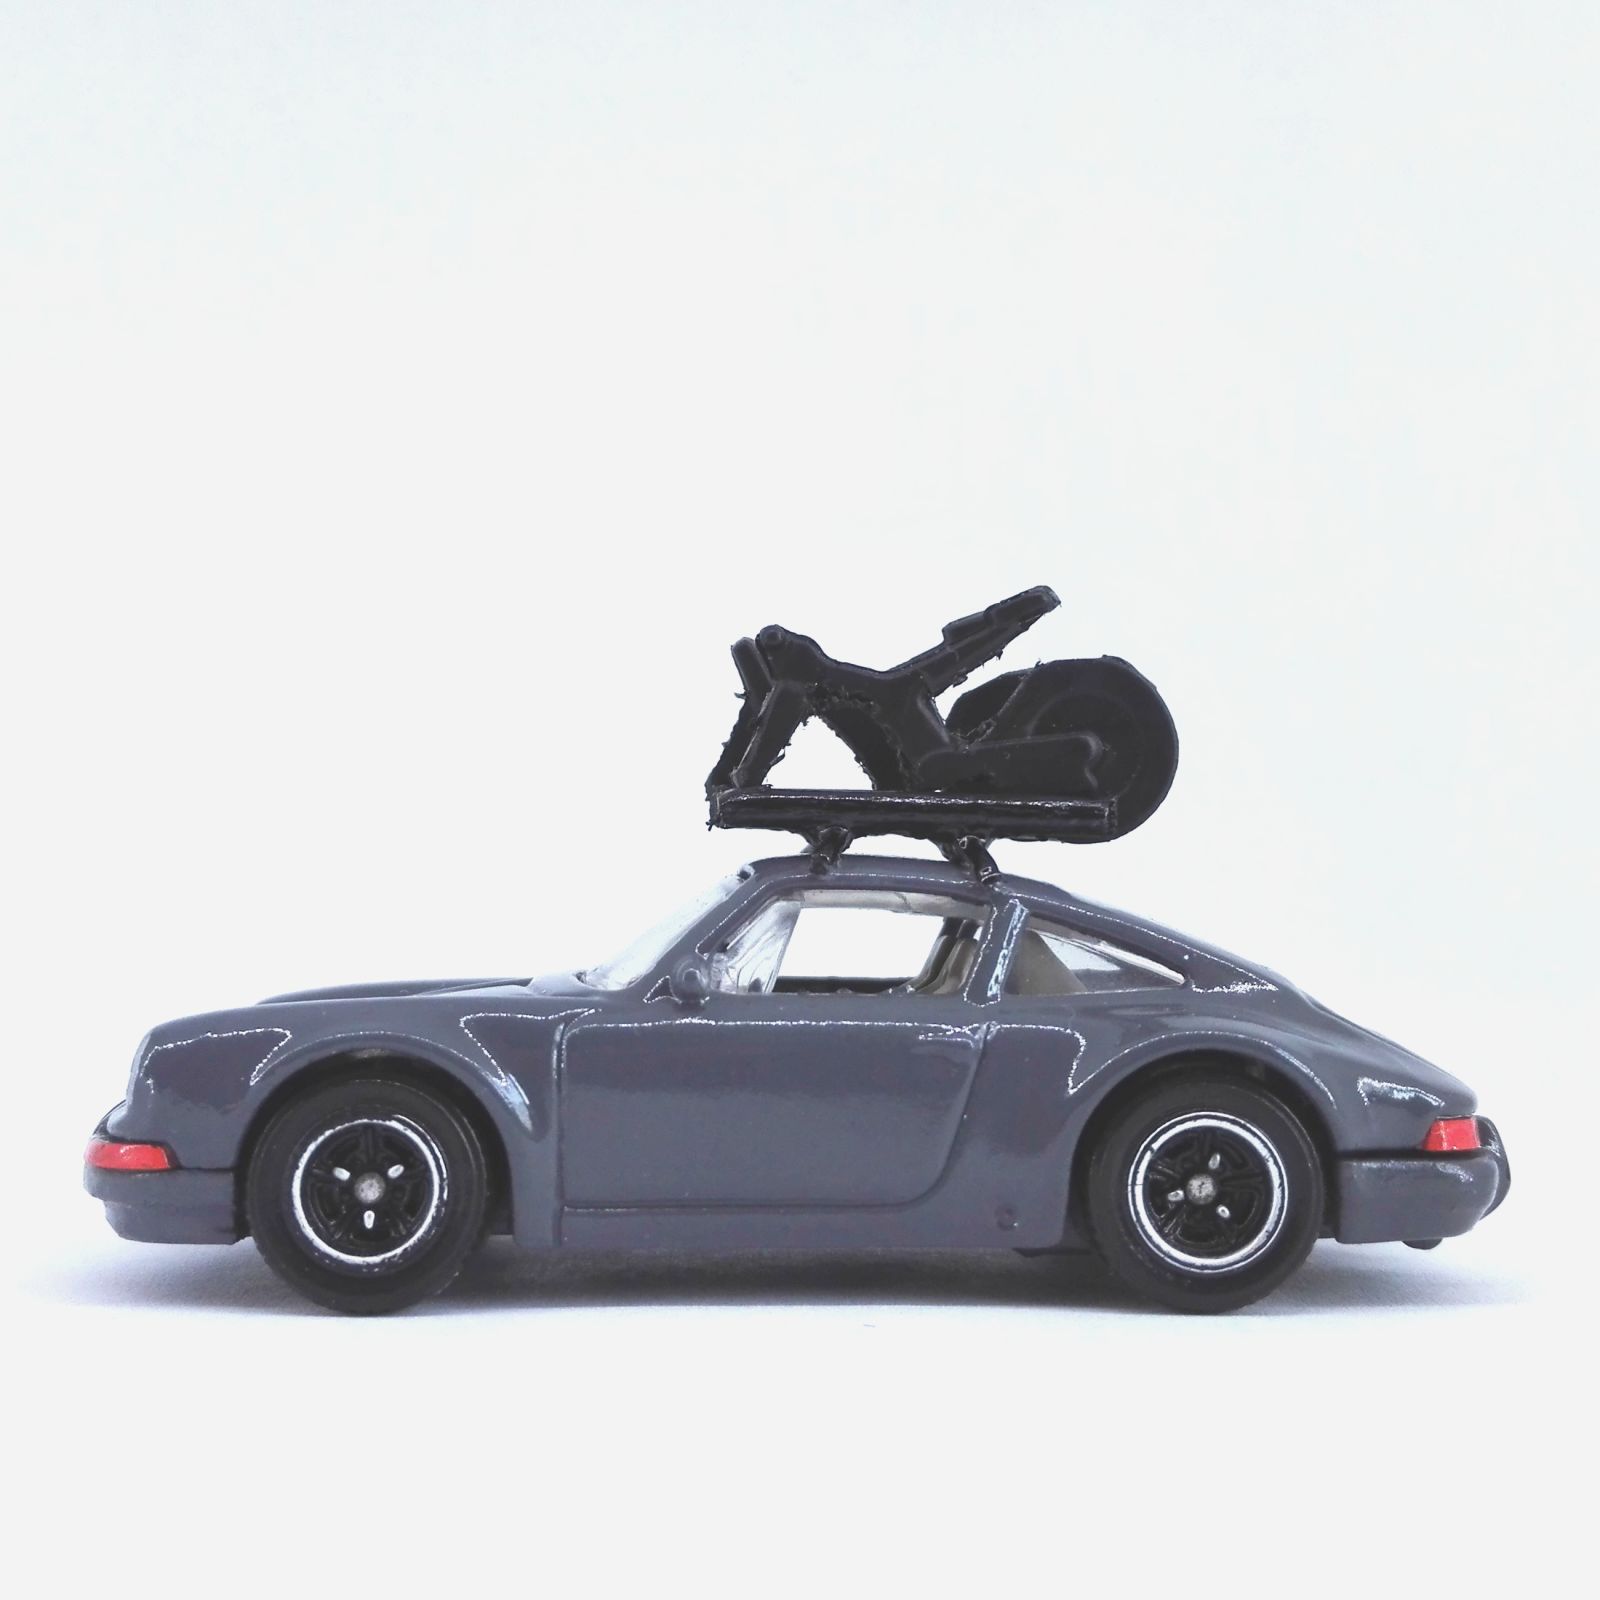 Illustration for article titled Another custom 911, cause why not?